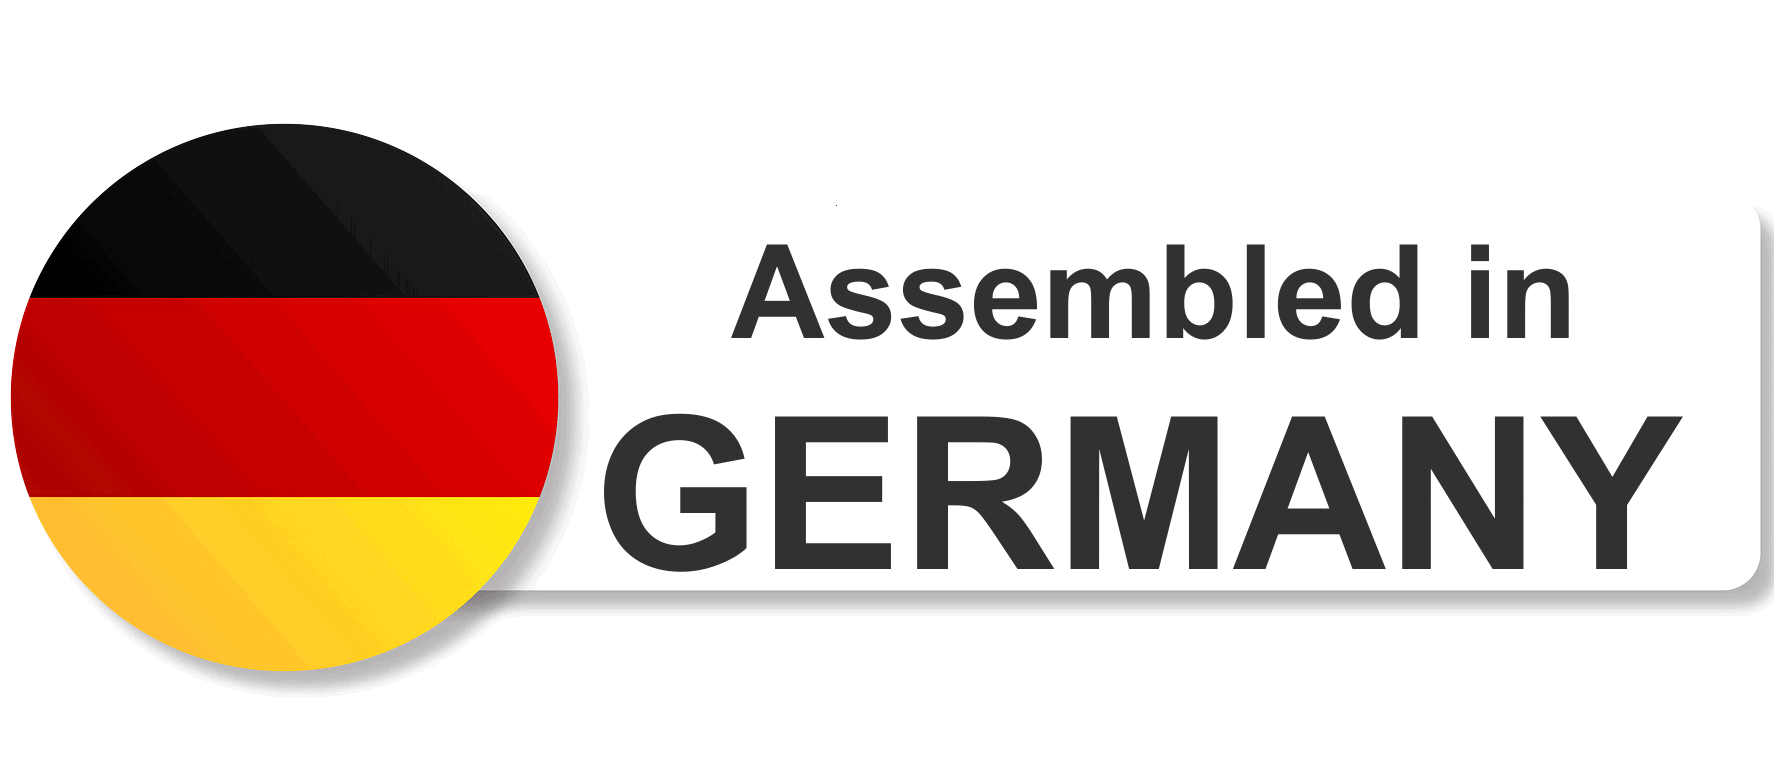 Assembled in Germany